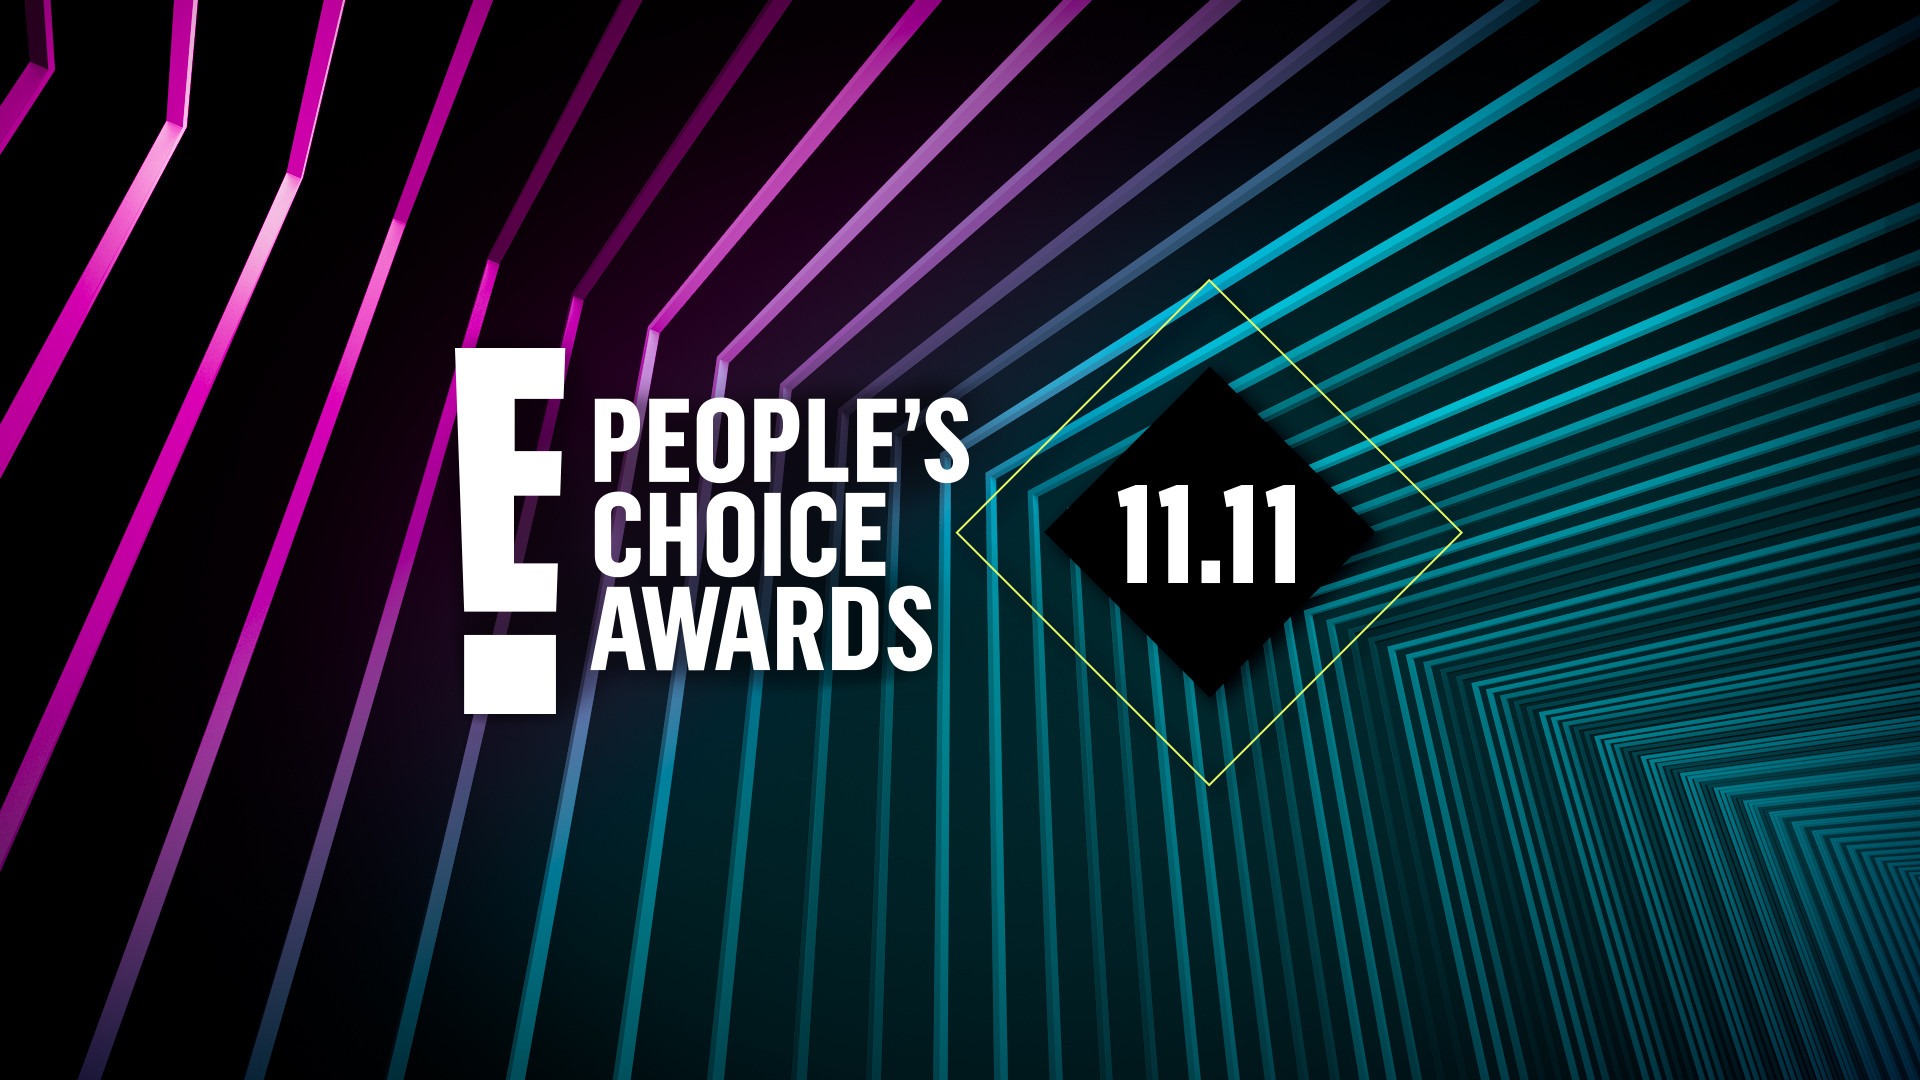 Everything You Didn't See on TV at the 2018 E! People's Choice Awards